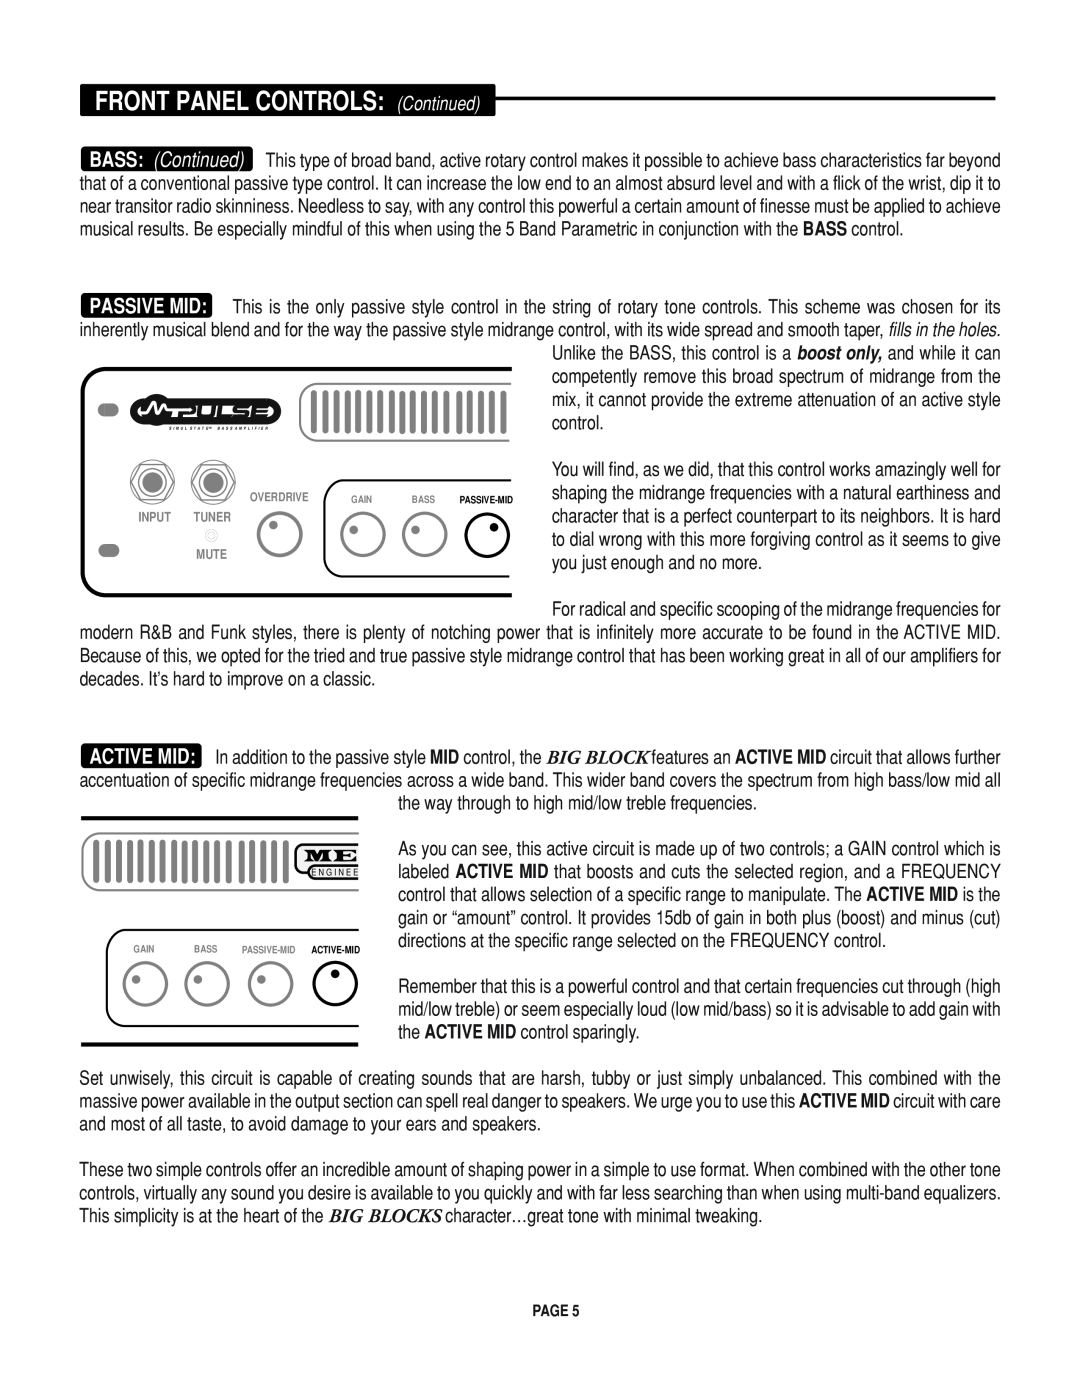 Mesa/Boogie Big Block 750 owner manual FRONT PANEL CONTROLS Continued, you just enough and no more, control 